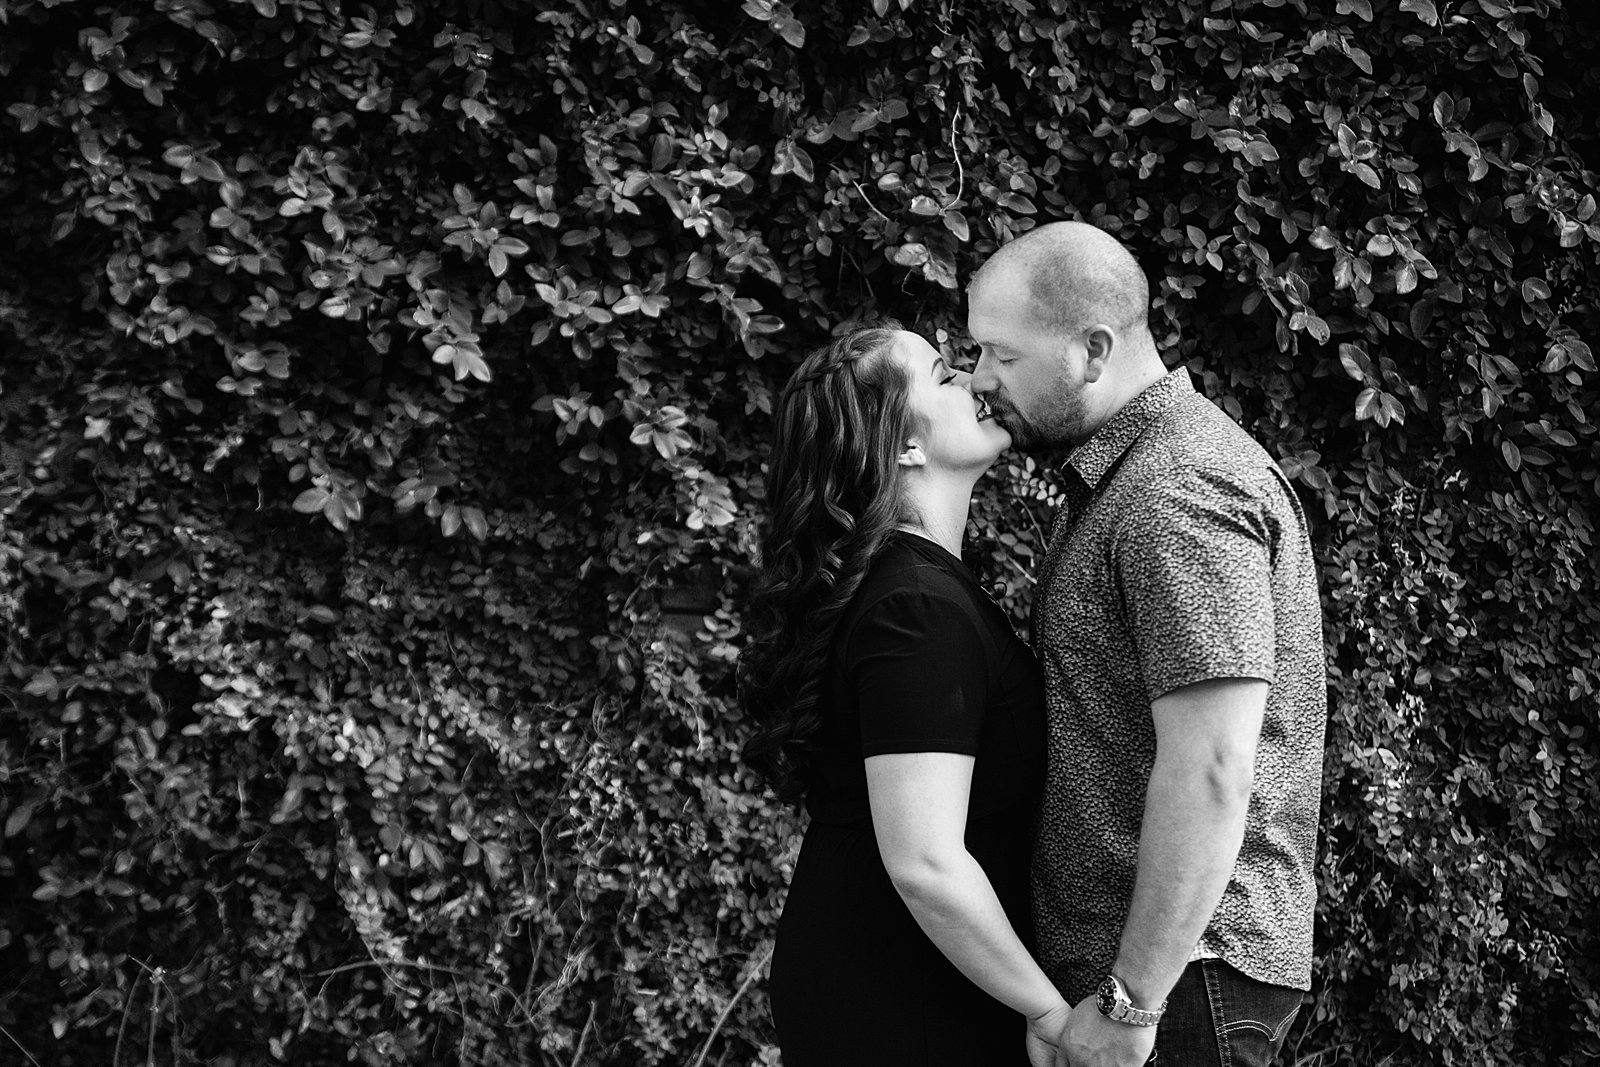 Couple share an intimate moment during their Roosevelt Row engagement session by Phoenix engagement photographer PMA Photography.